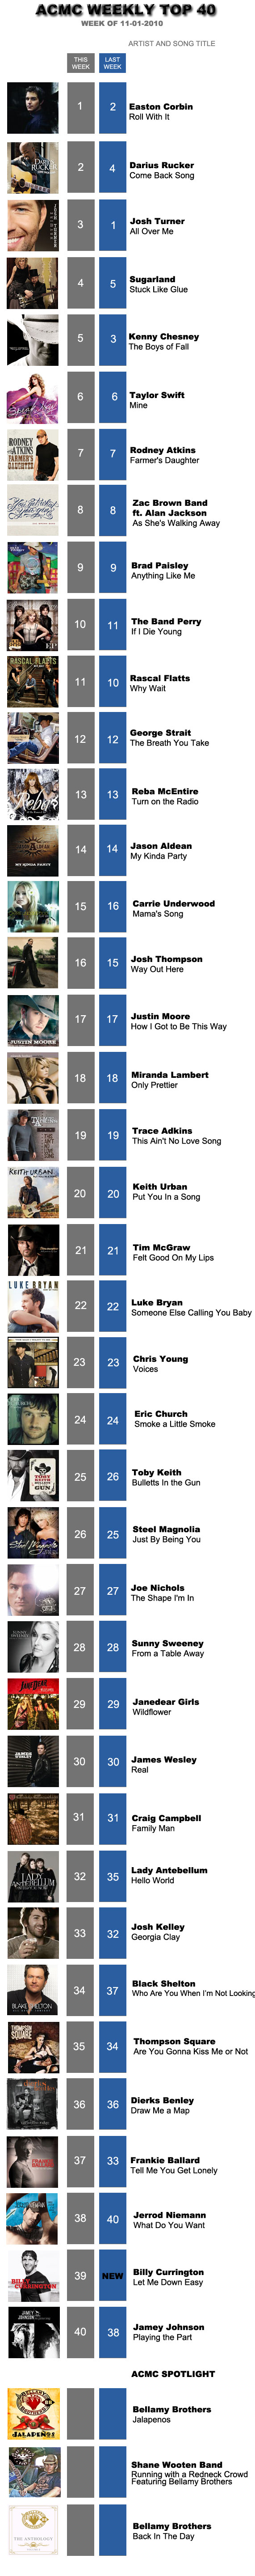 American Country Music Chart Weekly Top 40